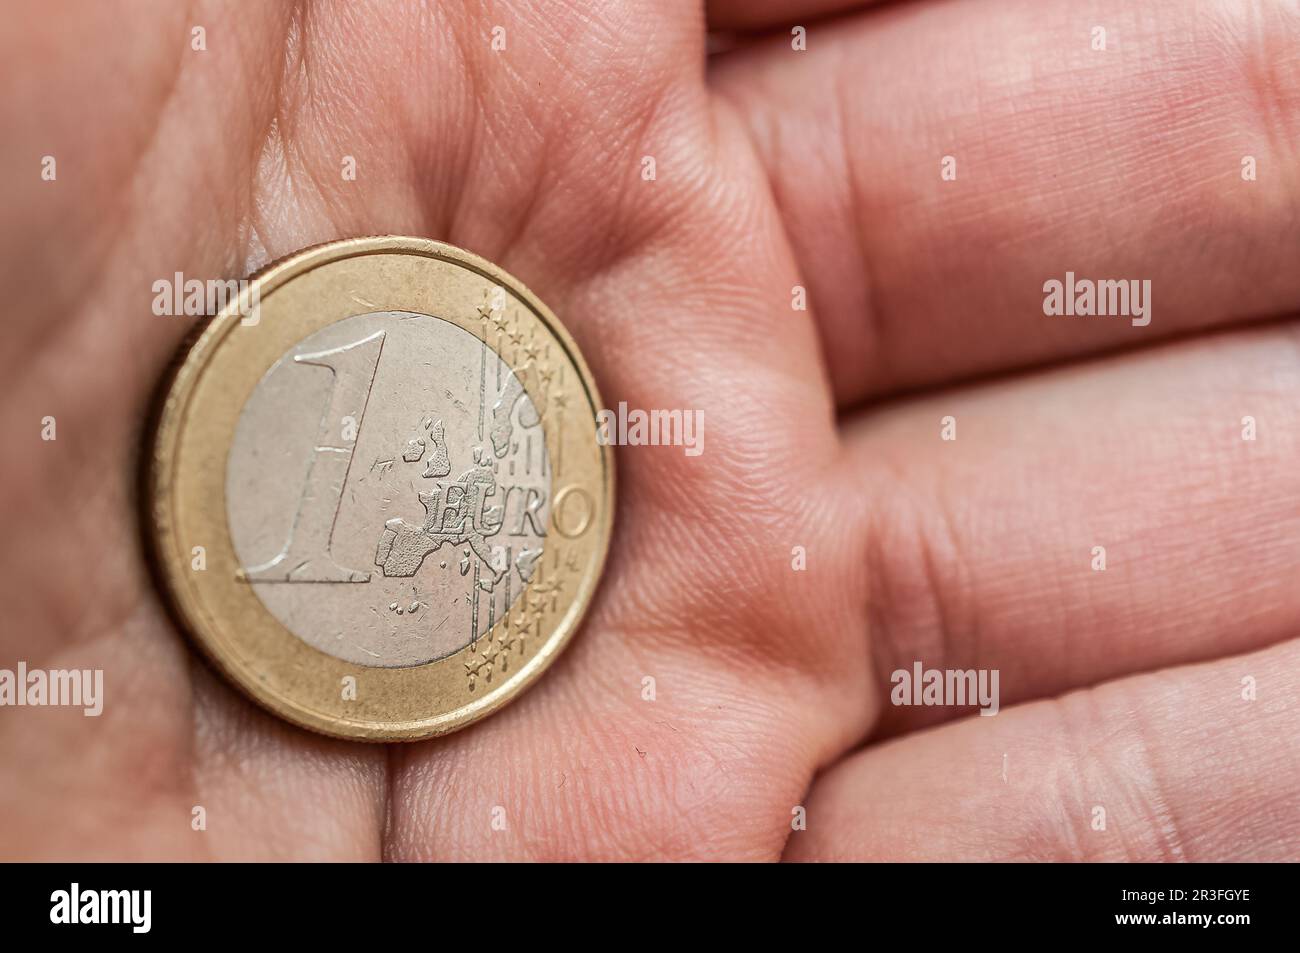 1 Euro coin held in the palm of the hand Stock Photo